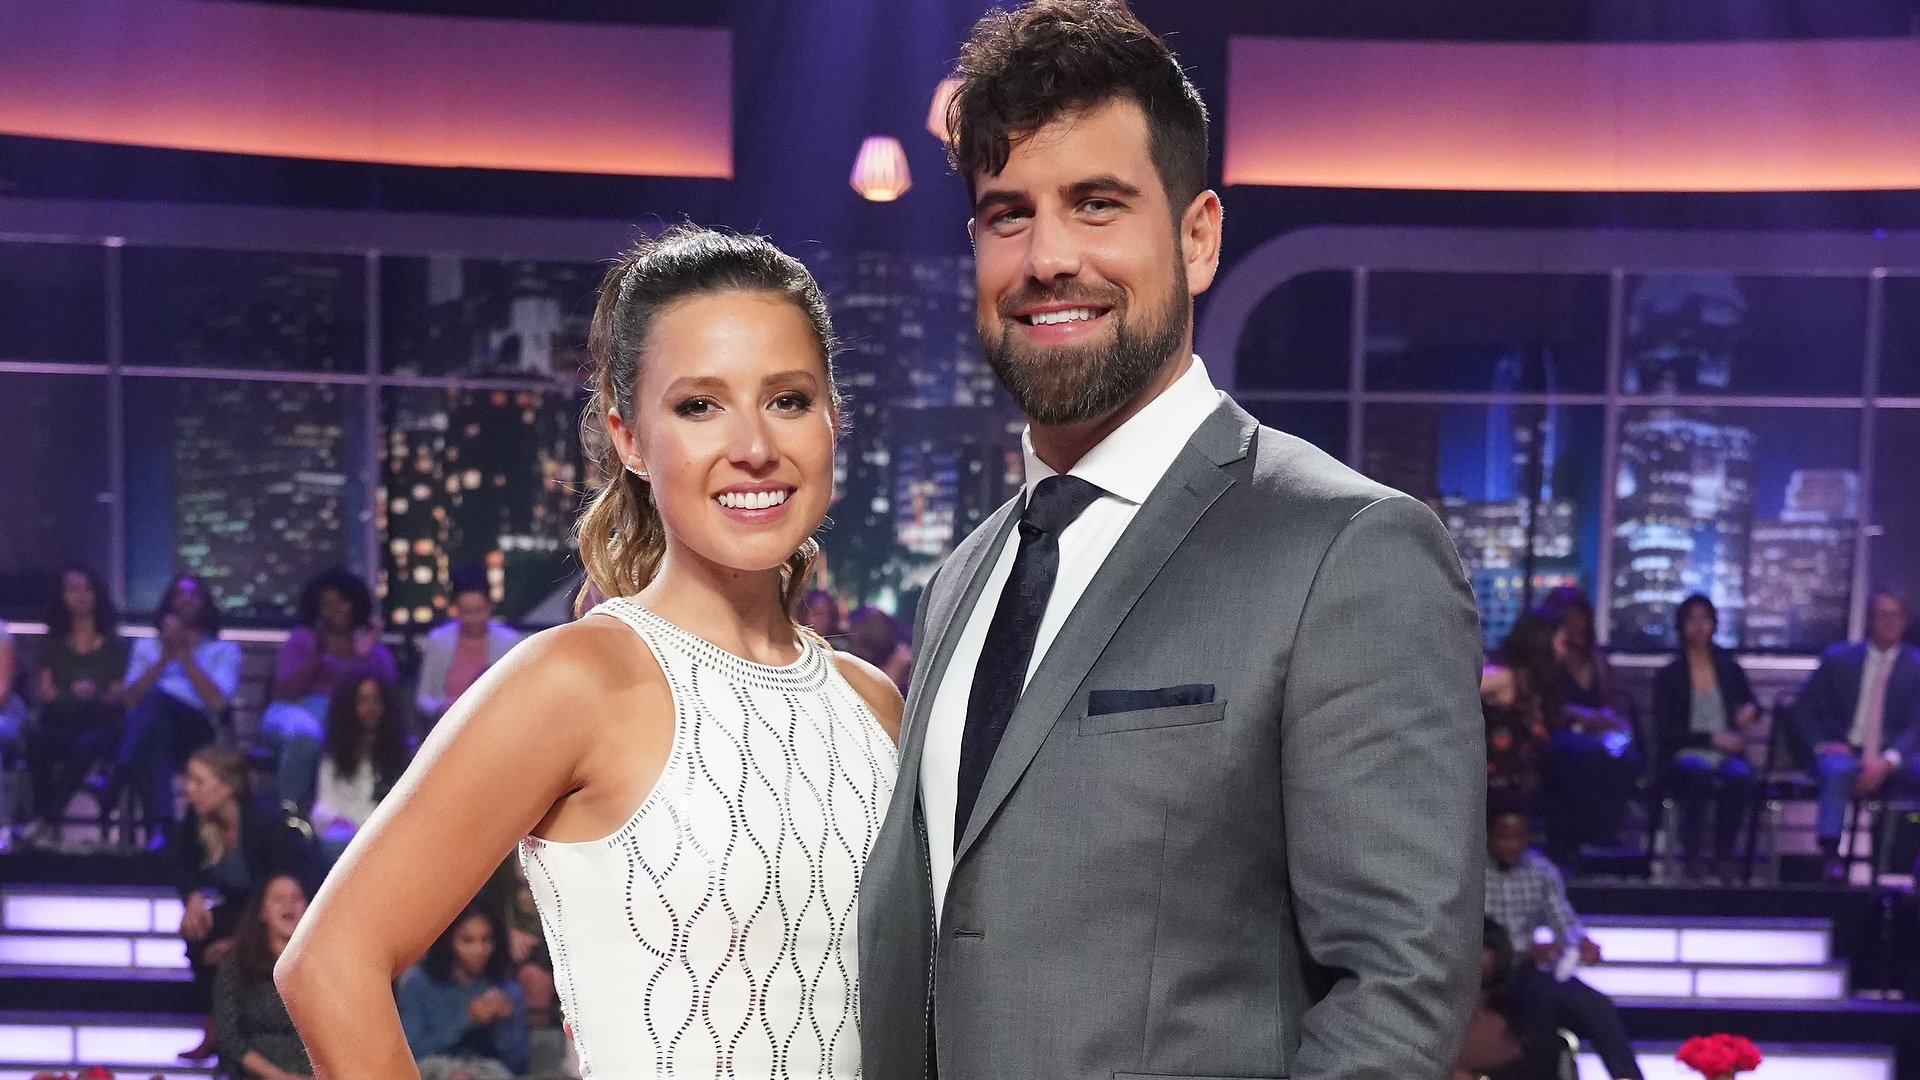 Why Did Blake Moynes and Katie Thurston Break Up? The Bachelorette Stars Confirm the End of Their Engagement on Instagram